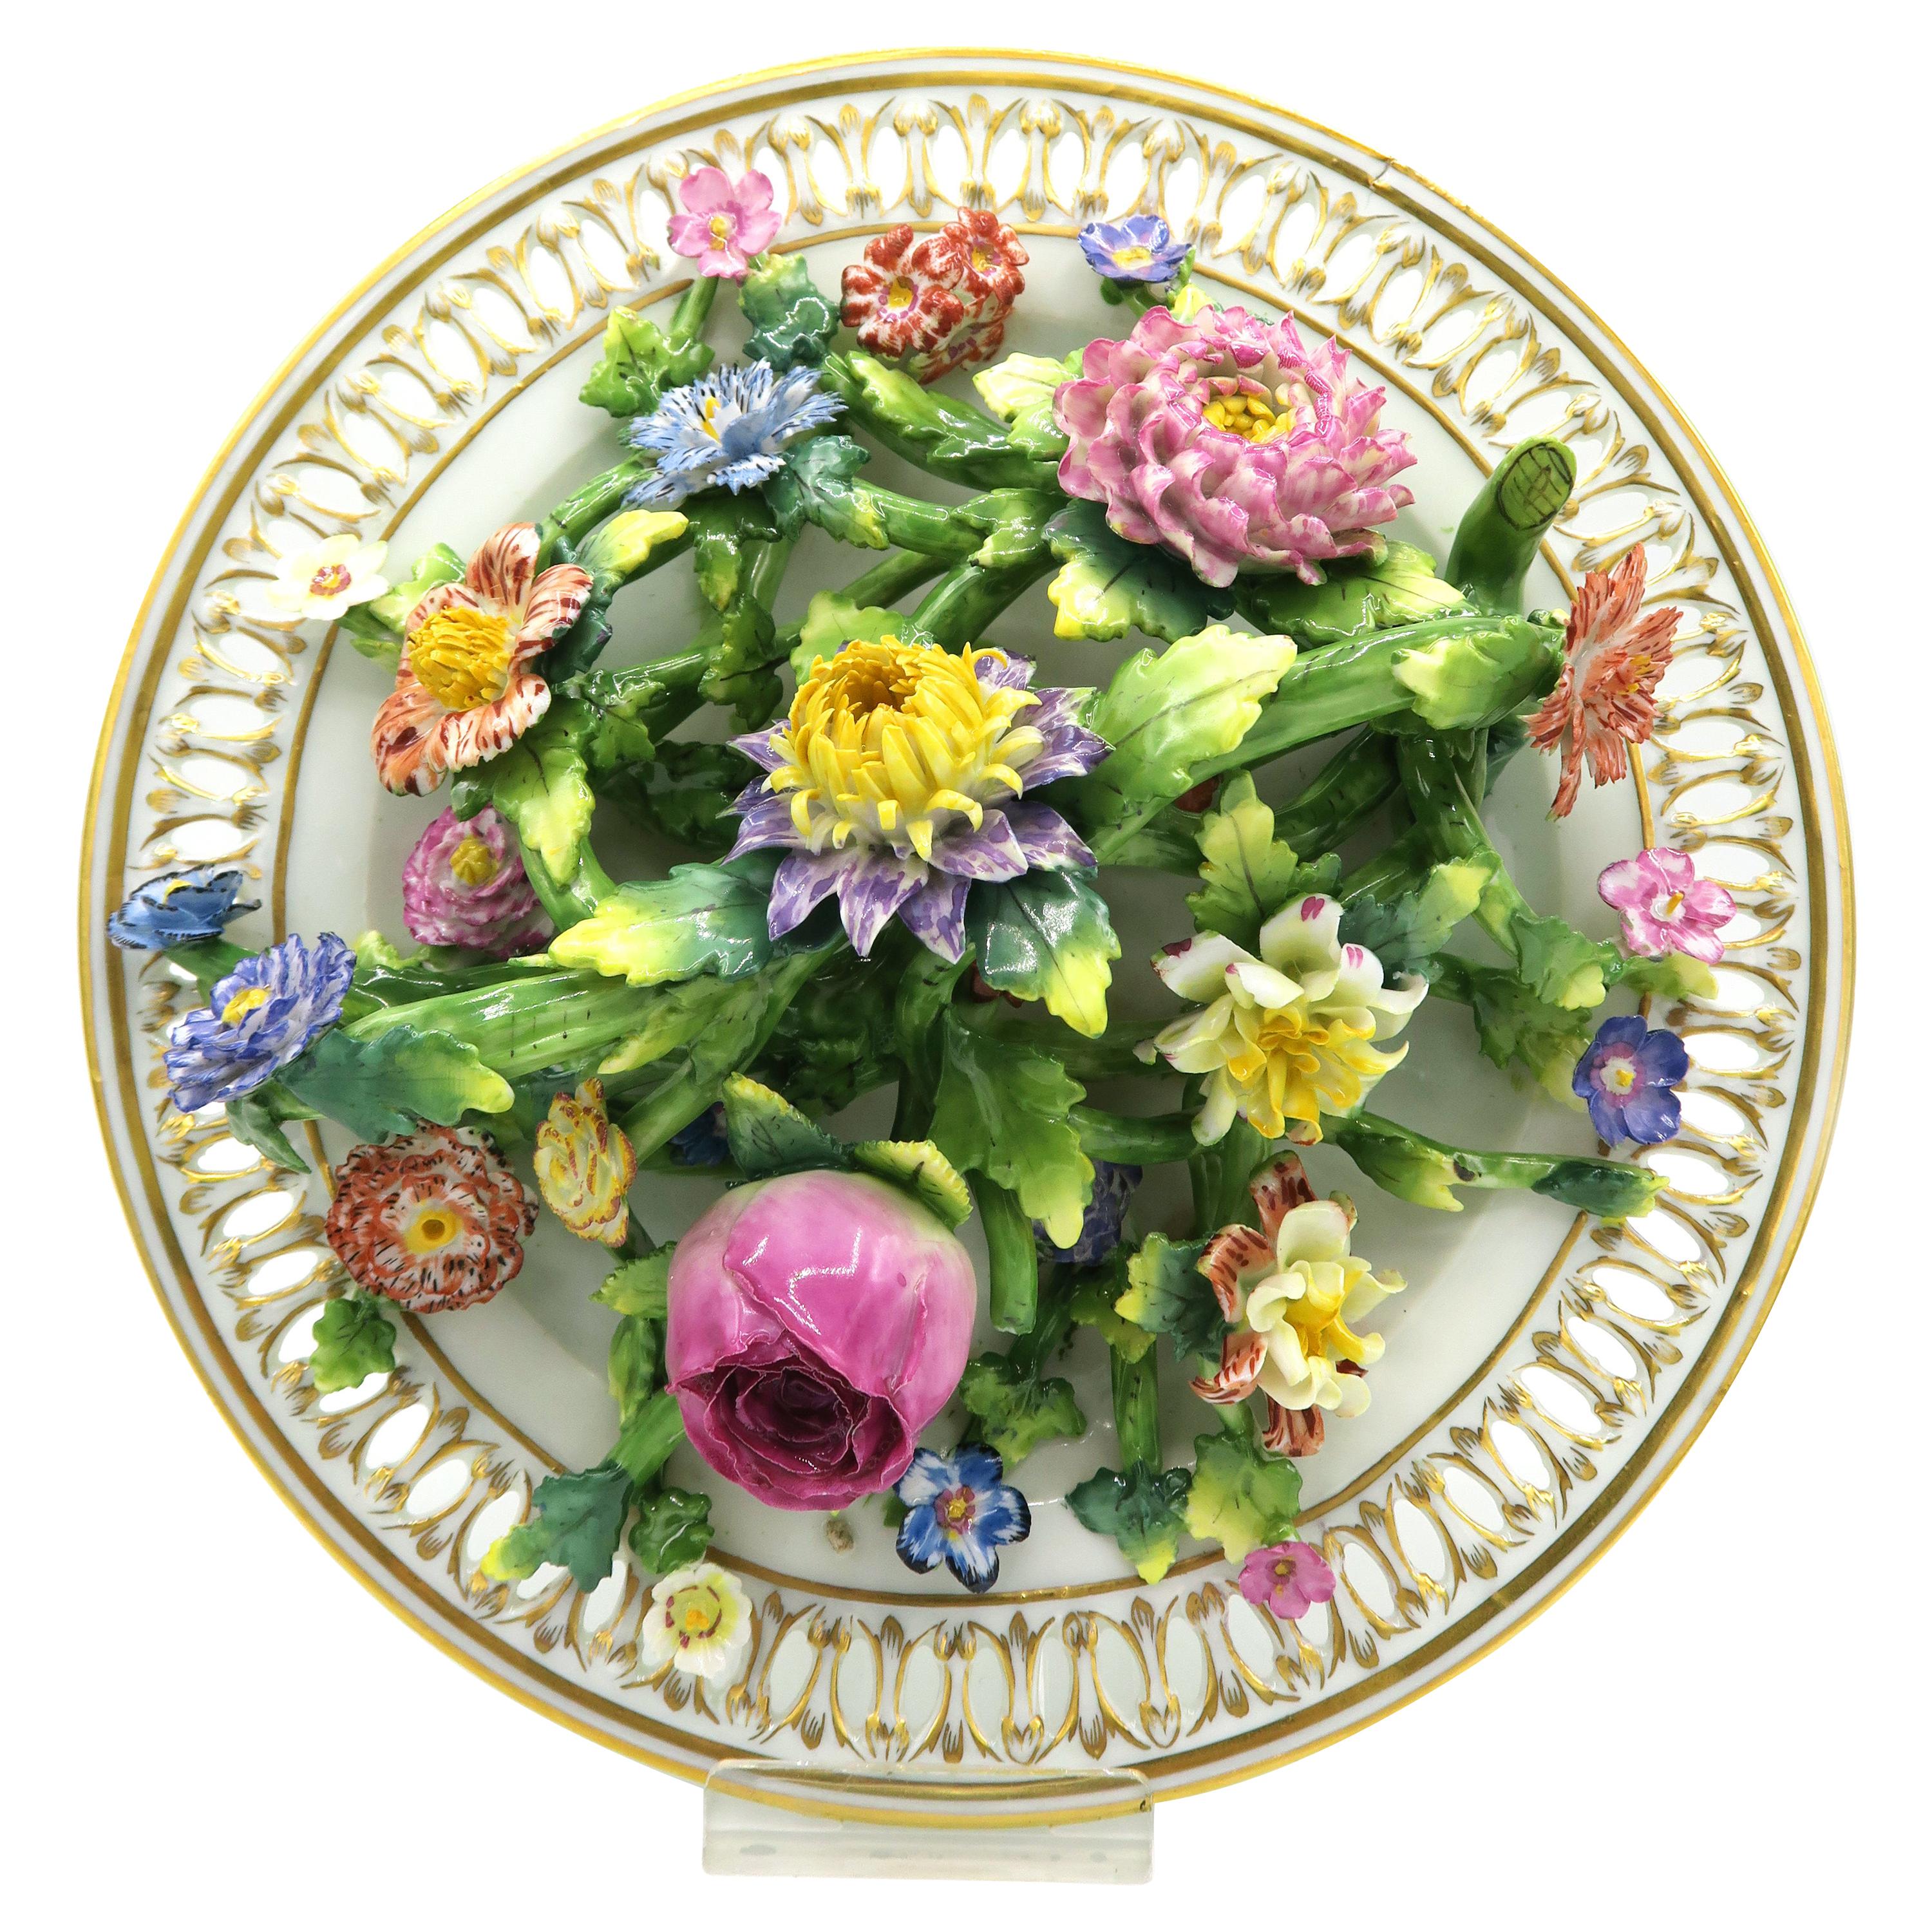 Antique Victorian Meissen Porcelain Flowers and Plate with Trom-Iʻoeil Effect For Sale